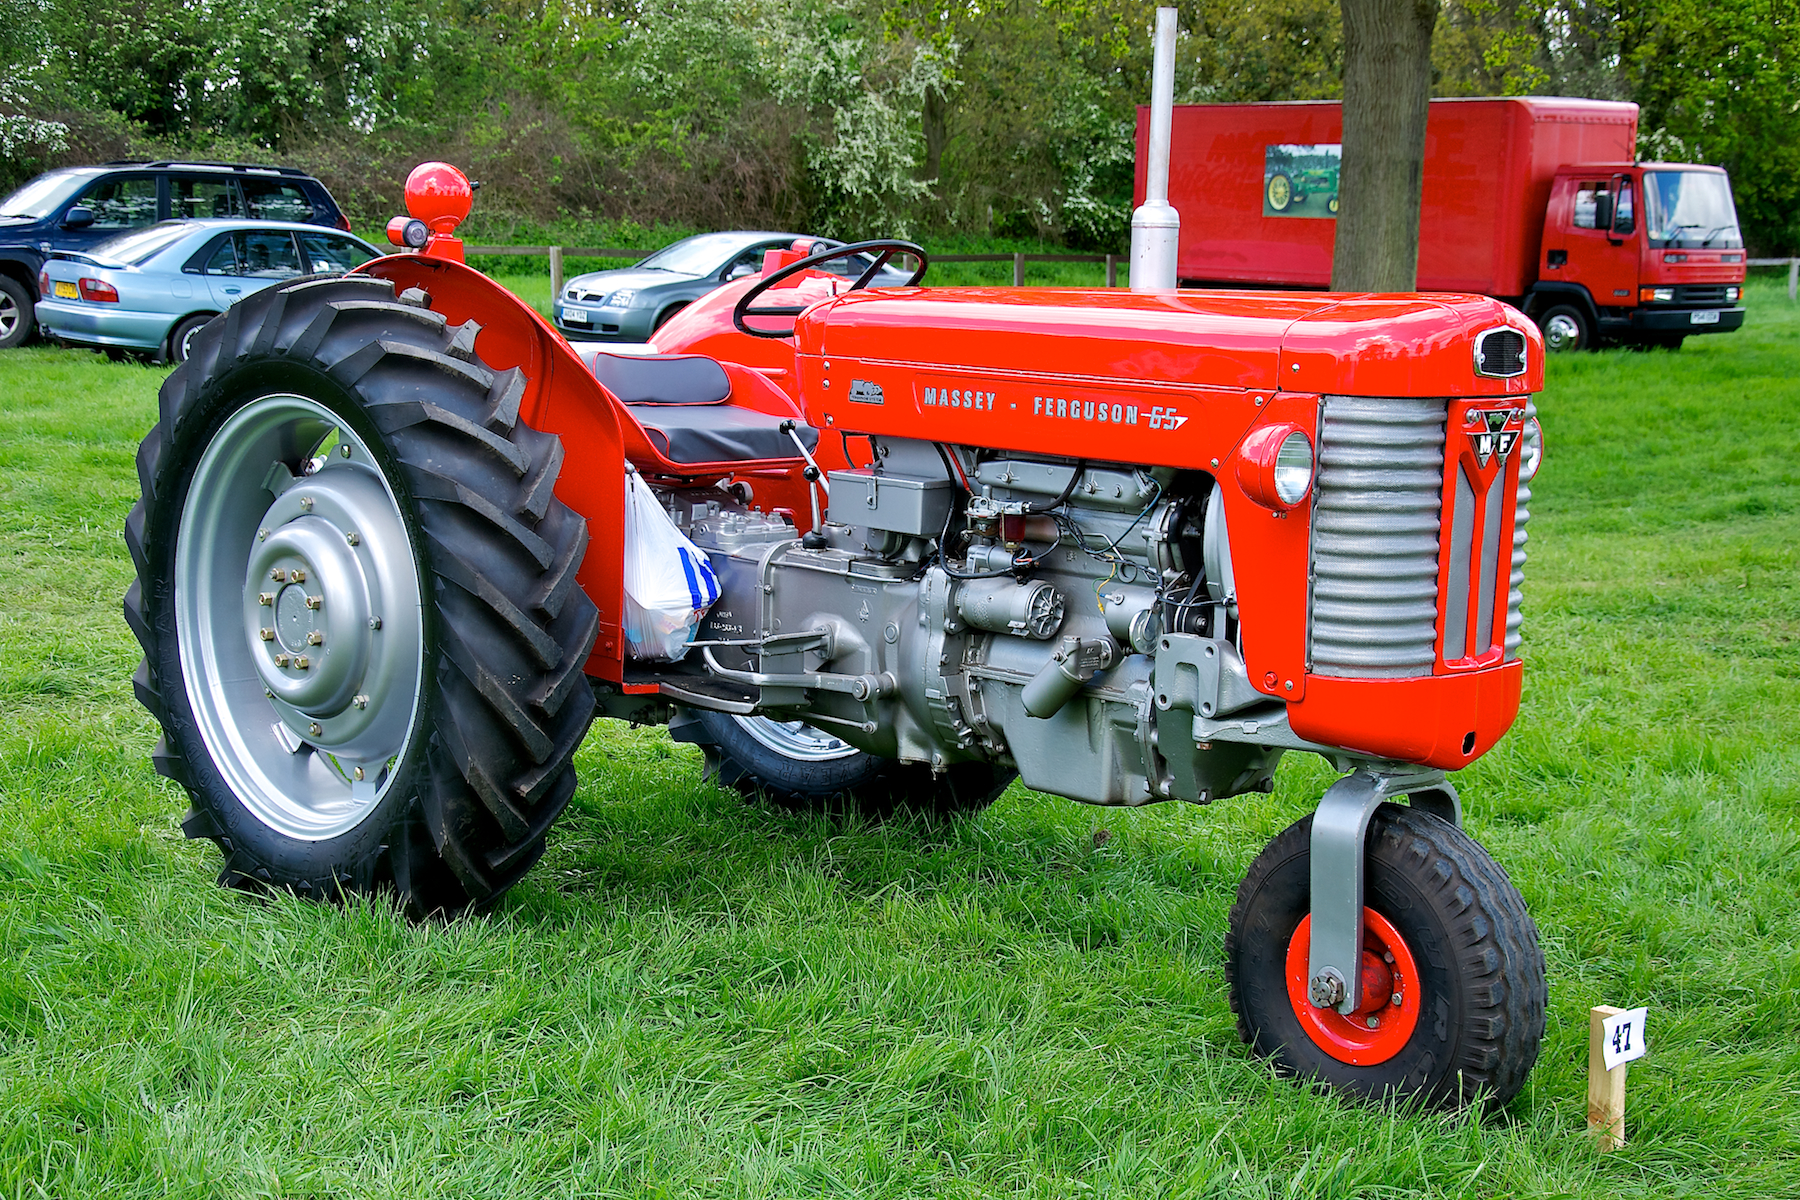 an old red tractor is on display in a park